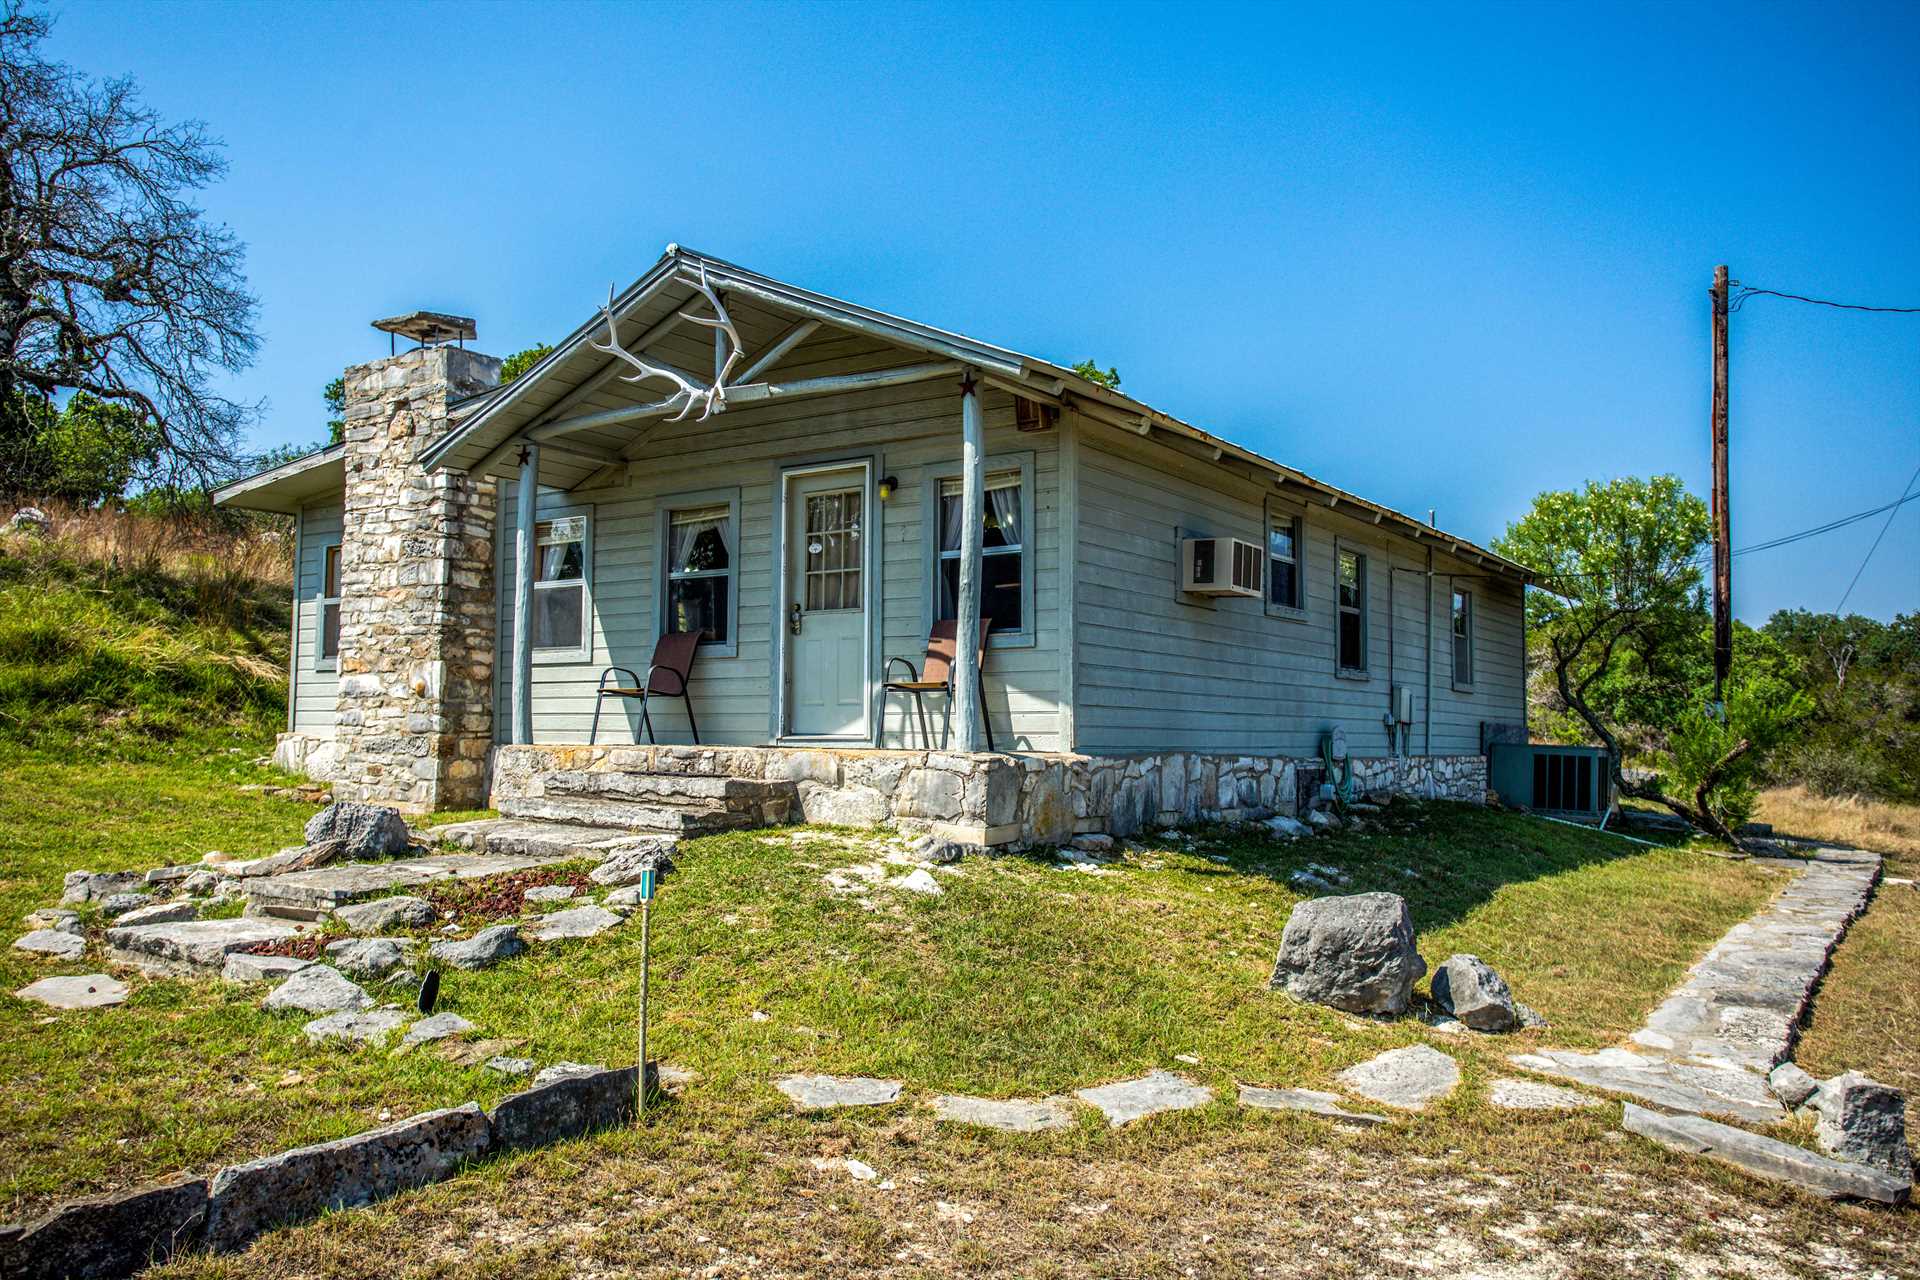                                                 The Hill House rounds out the three properties that make up the Fall Creek Retreat, your Hill Country escape for up to 25 people!